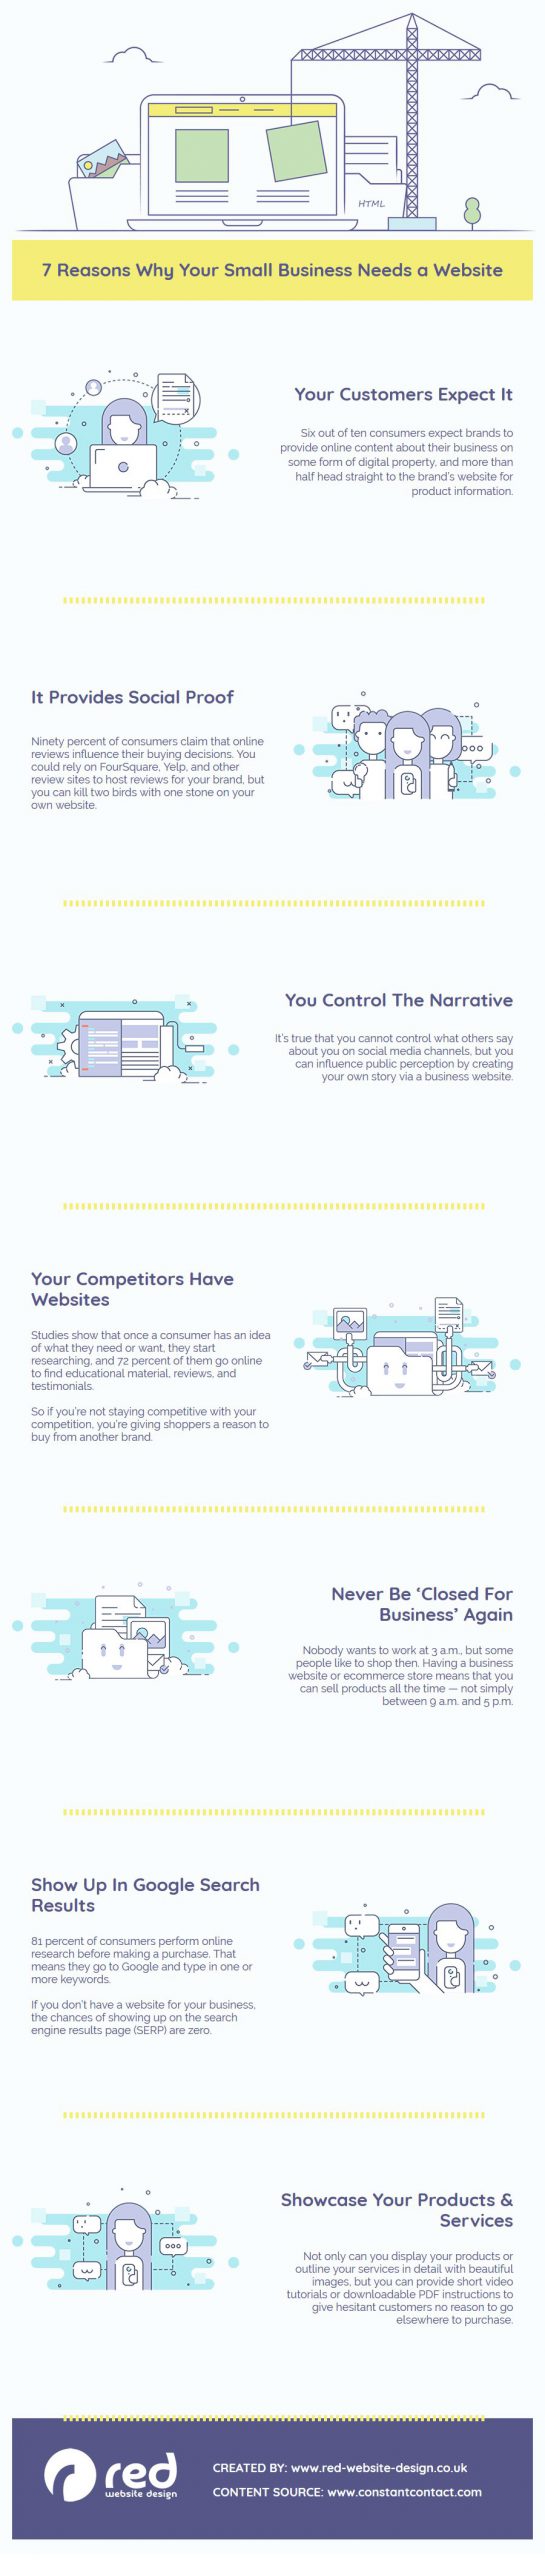 7 reasons why you must have a website in 2021 infographic scaled 1